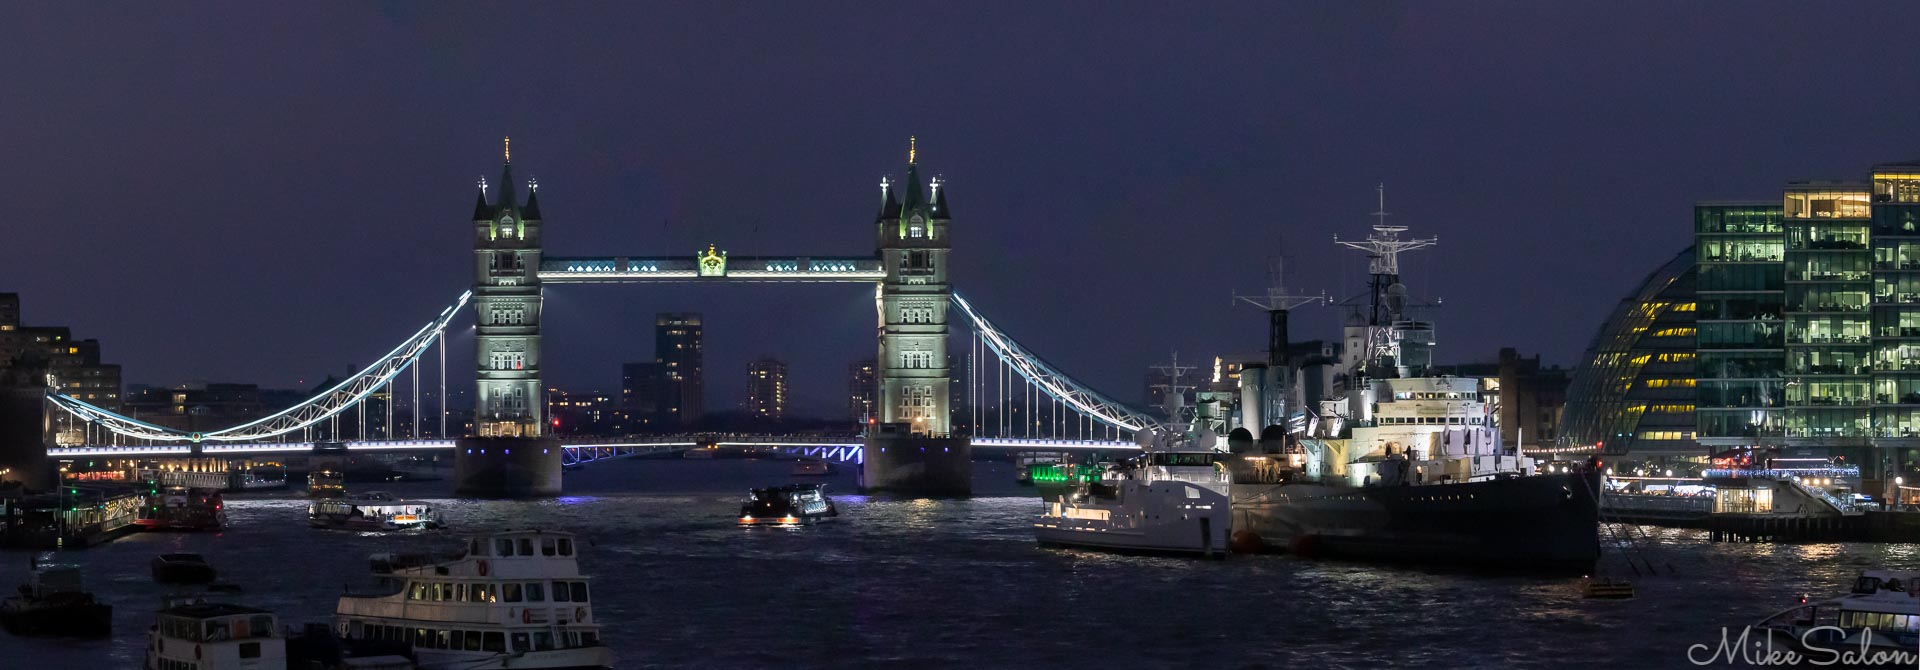 Tower Bridge : Night view of one of London's best landmarks, the Tower Bridge. (_D0A3020-Pano.jpg)<br>Camera: Canon EOS 5D Mark IV